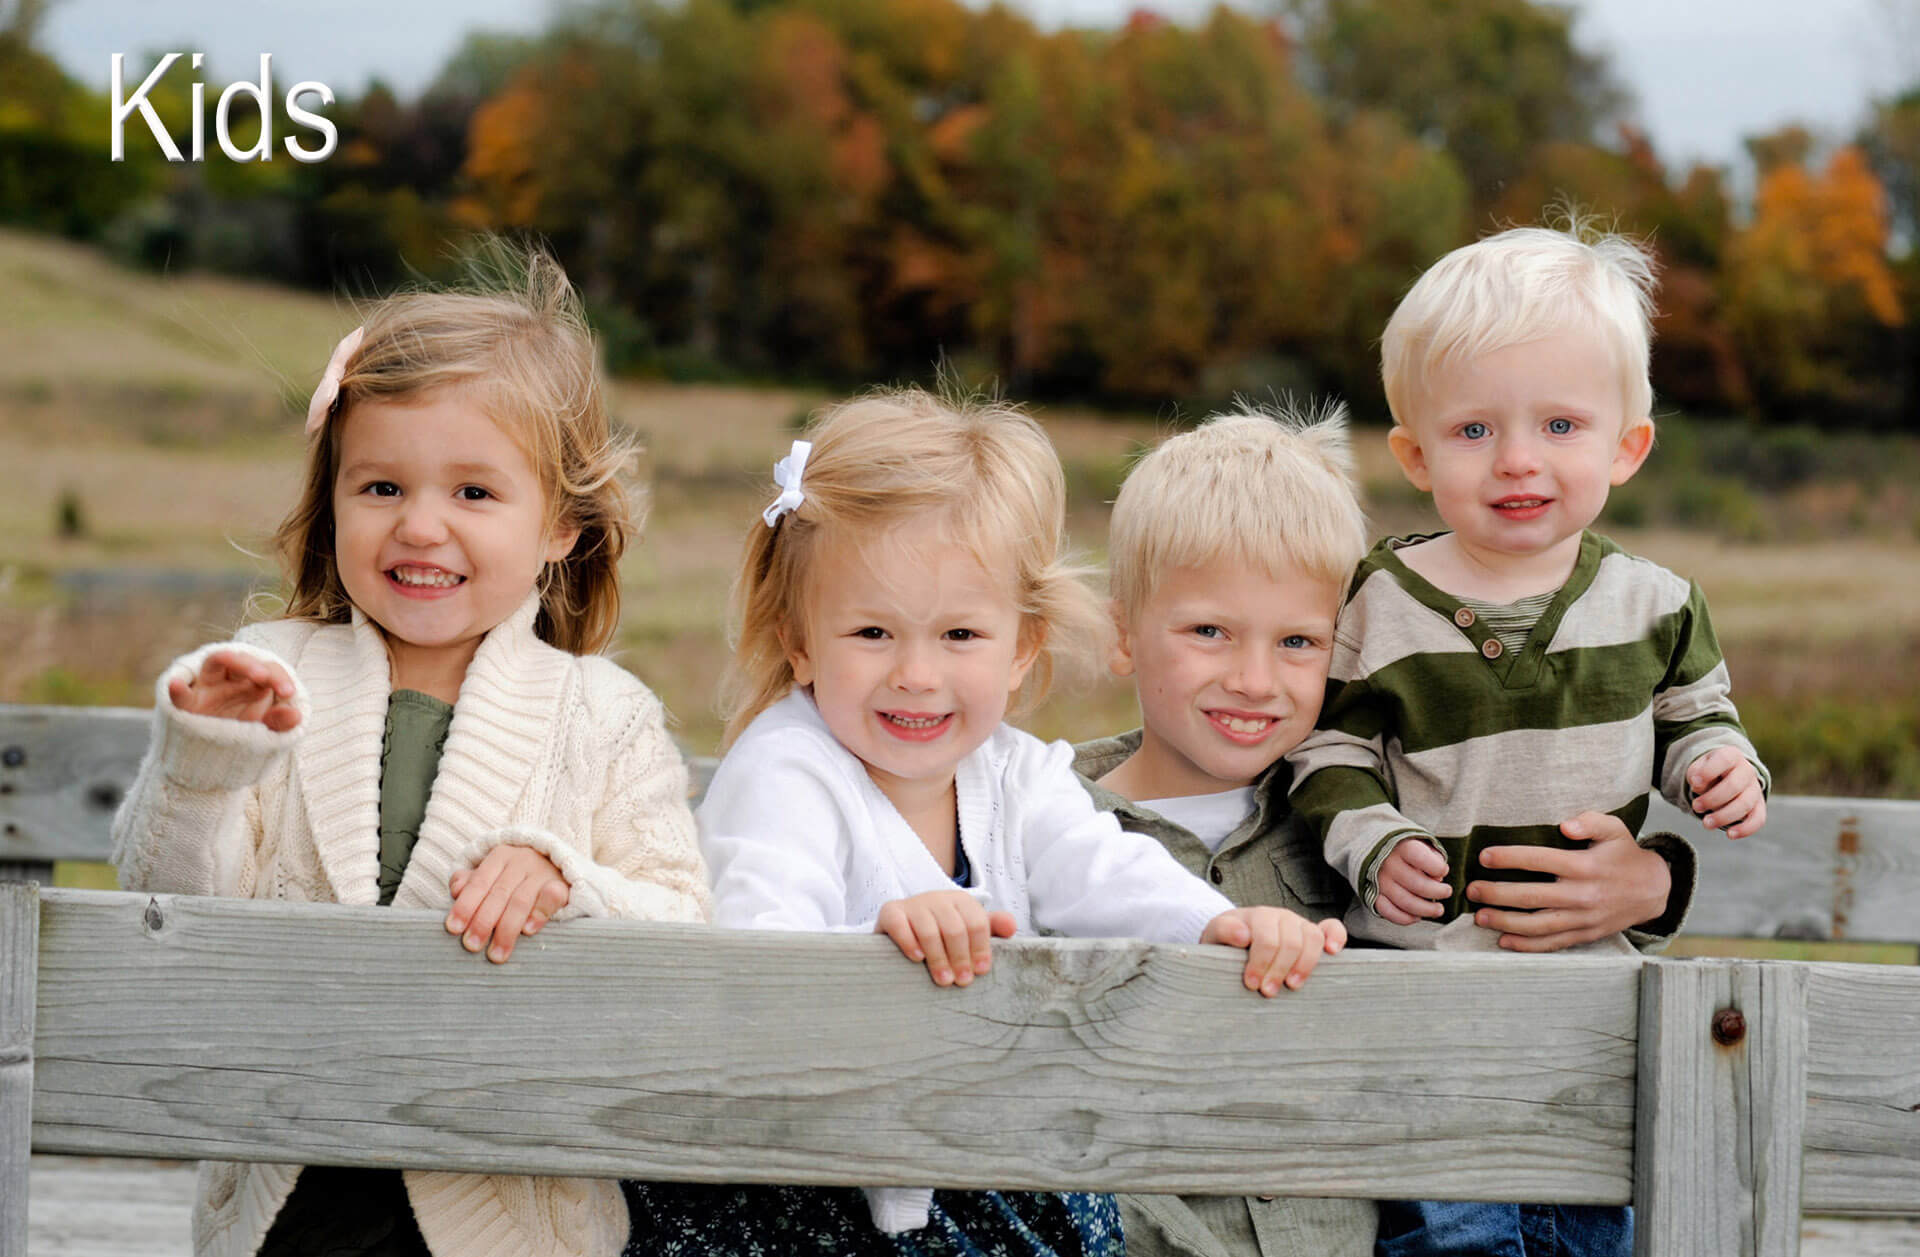 Fun family photography for the budget conscious metro Detroit, Michigan family.